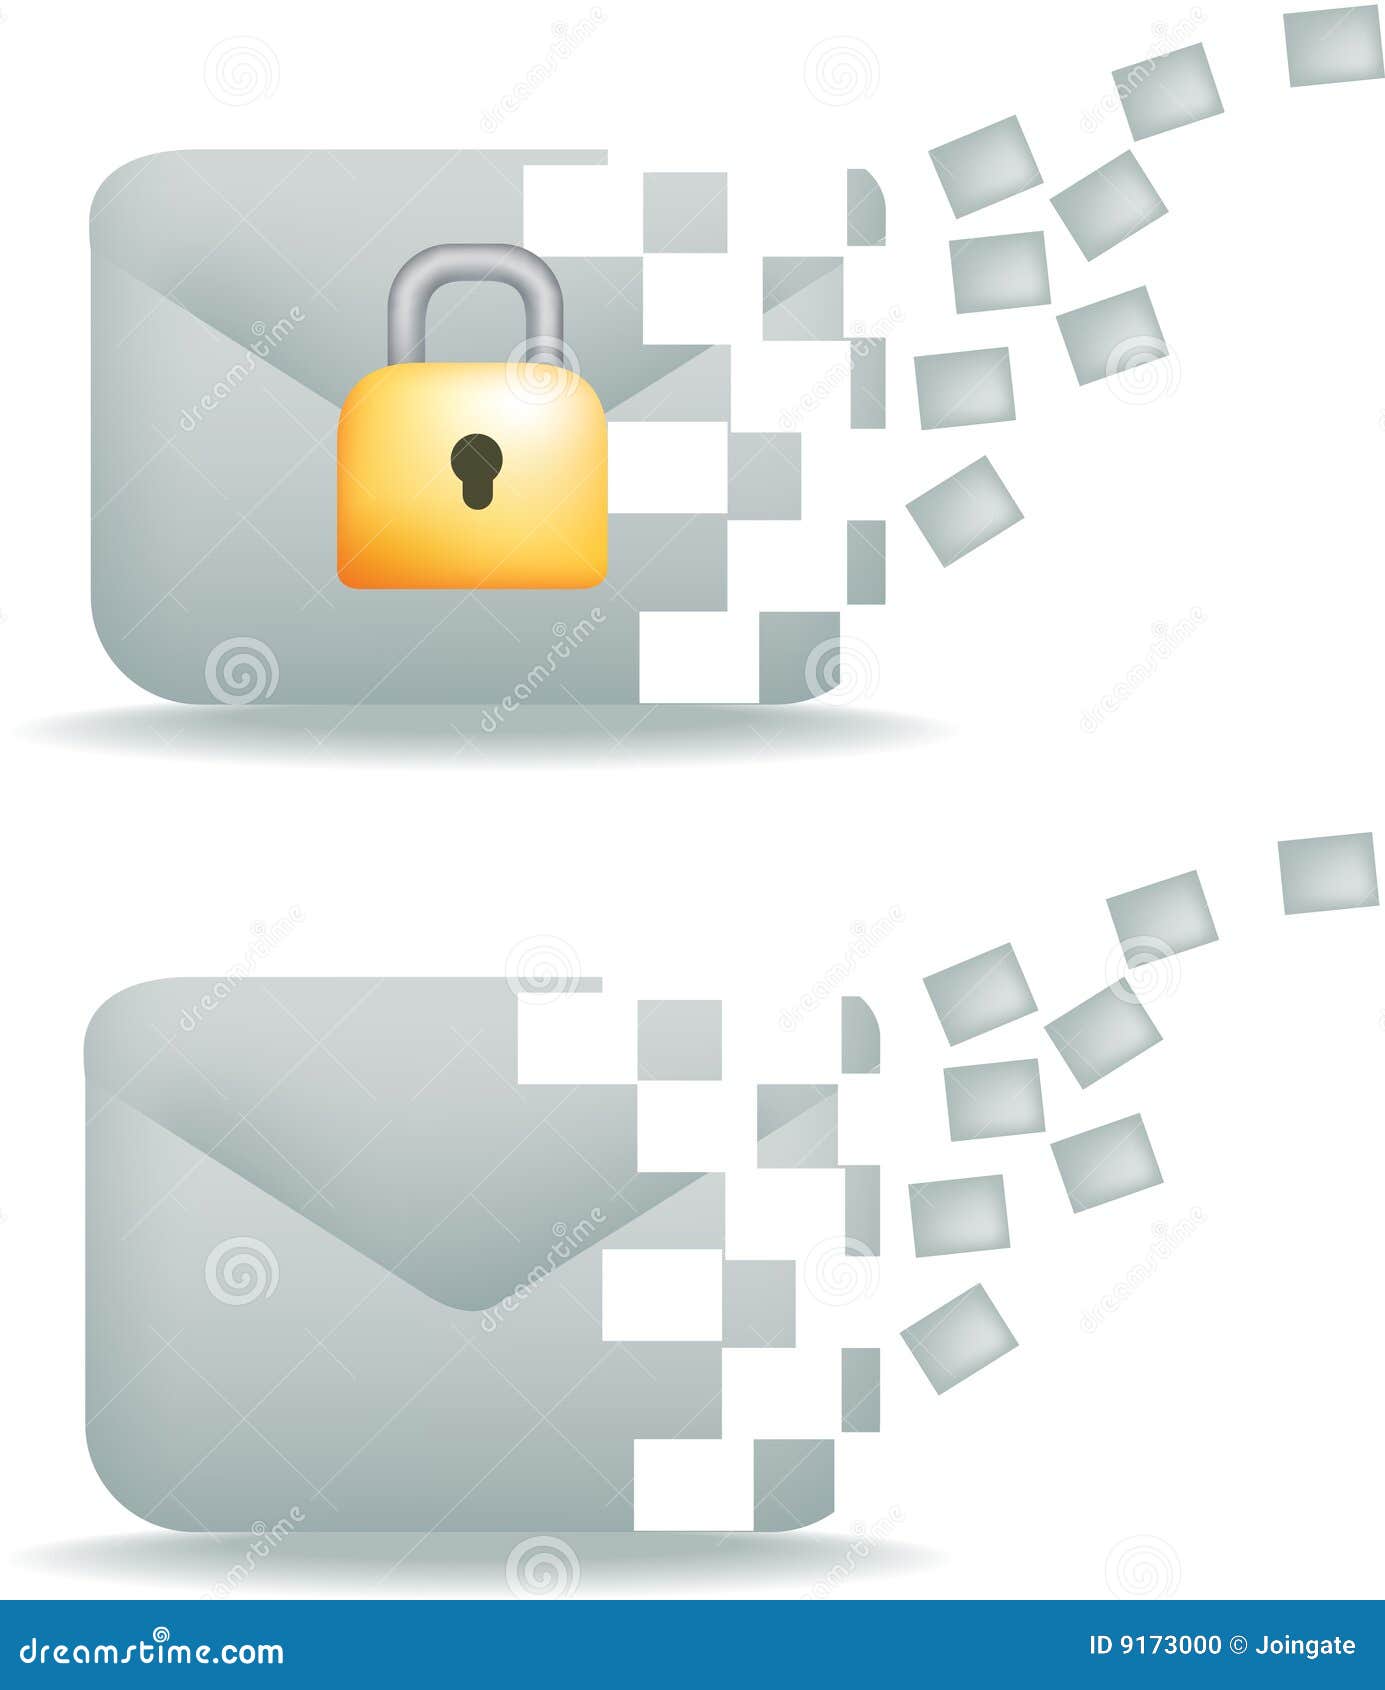 secure email and communication